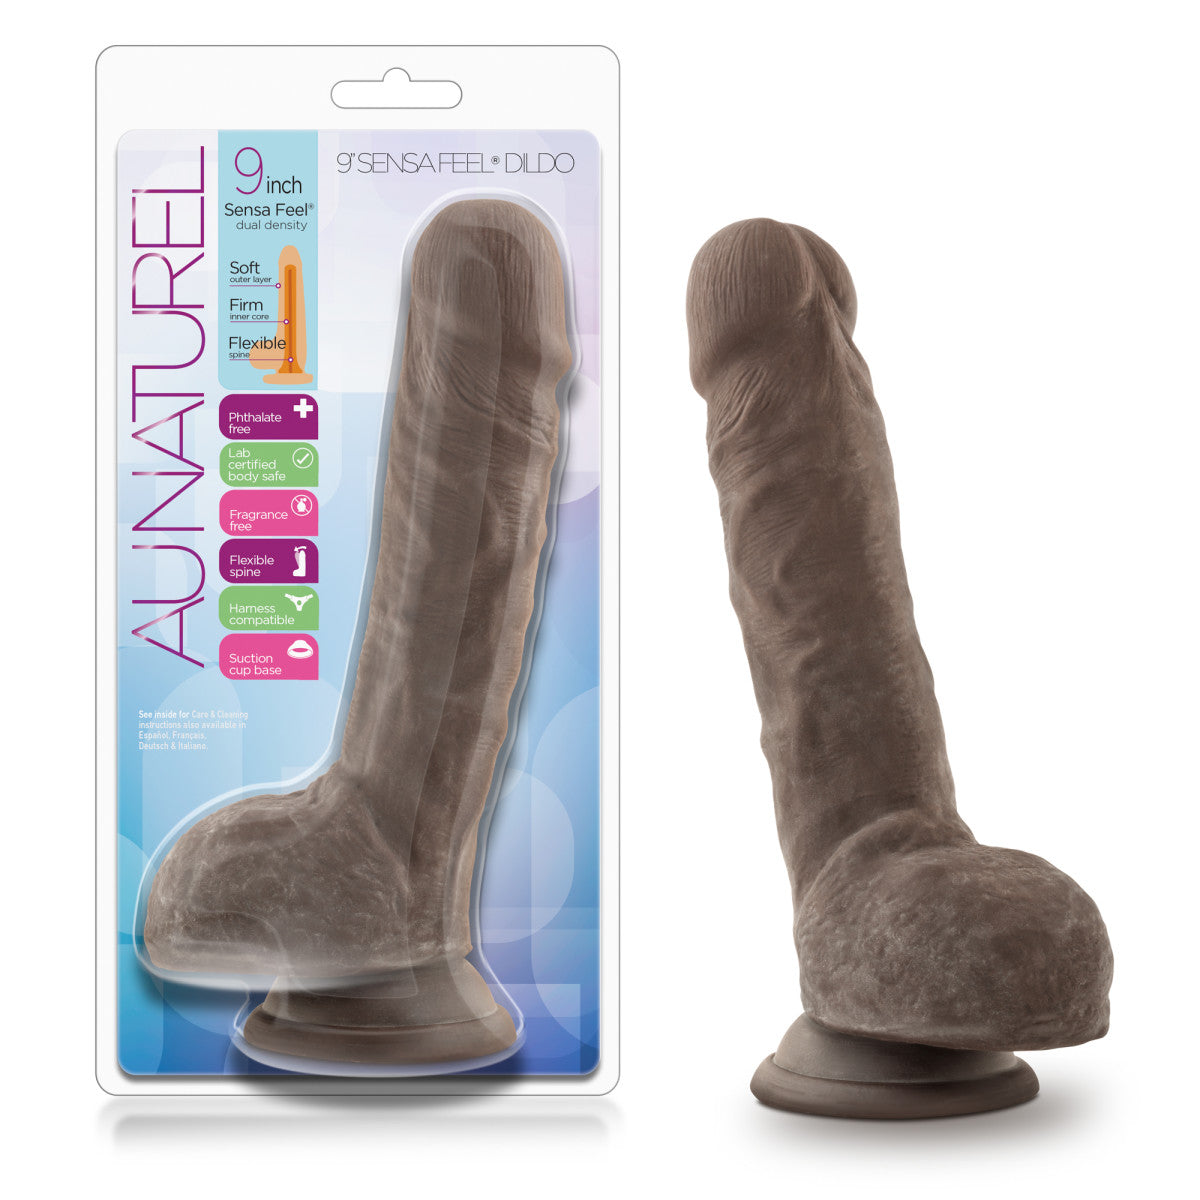 Au Naturel Realistic Chocolate 9-Inch Long Dildo With Balls & Suction Cup Base